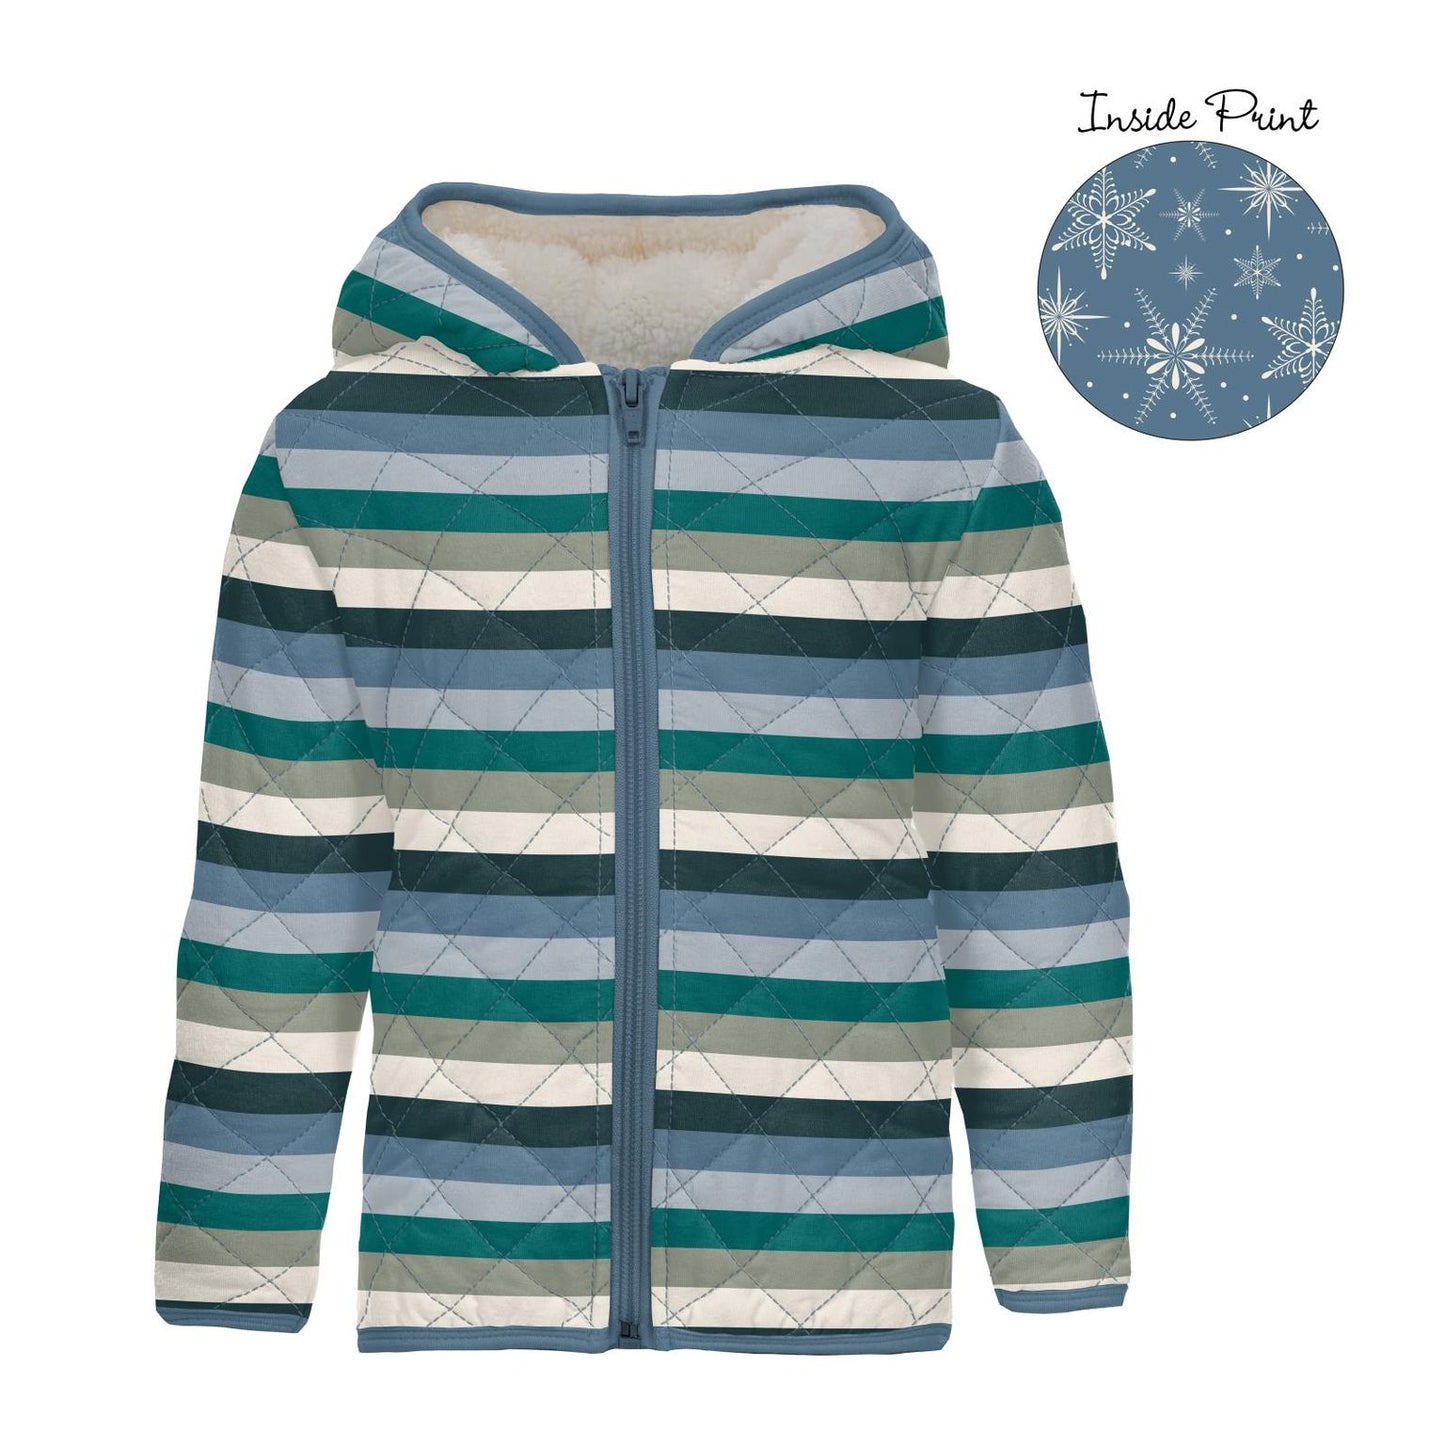 Quilted Jacket - Snowy Stripe with Parisian Blue Snowflakes